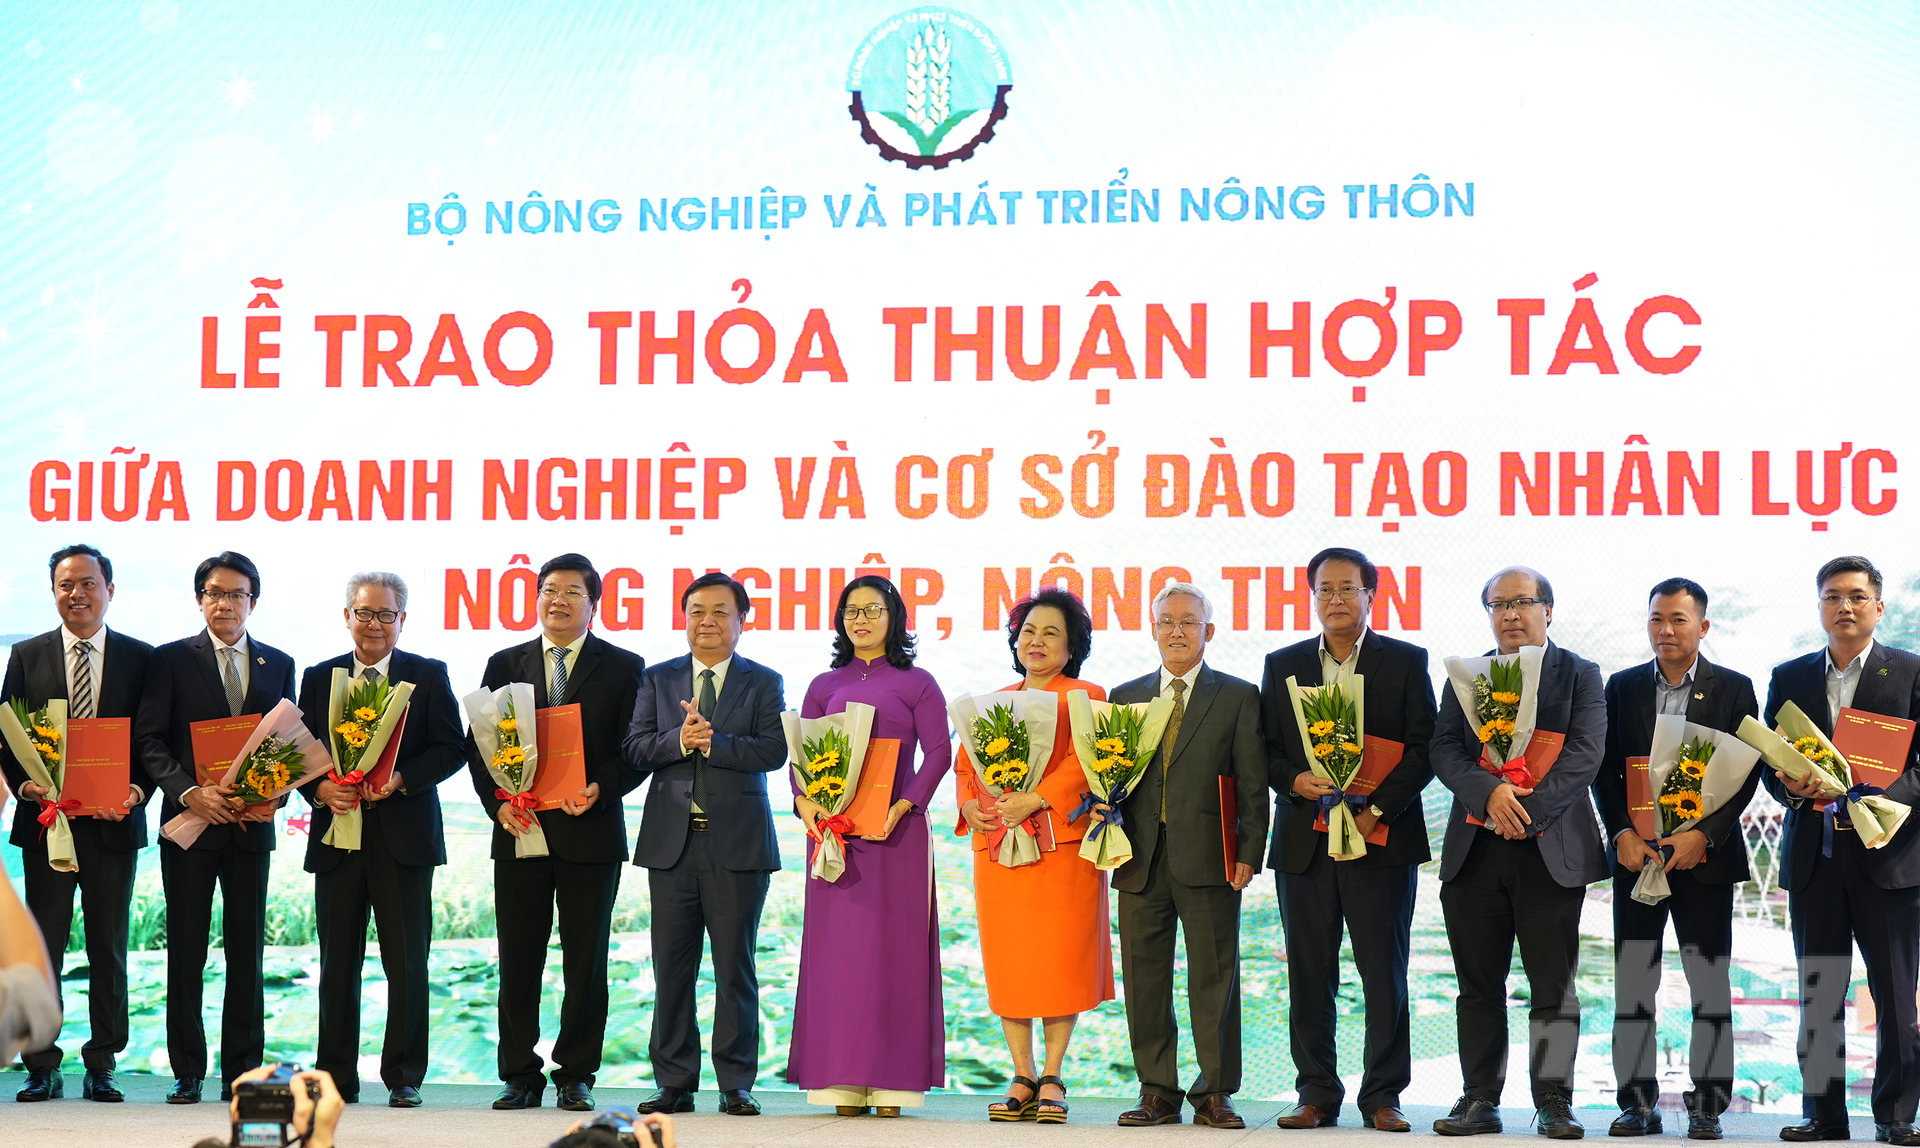 Vietnam National University of Agriculture has made an agreement to partner with businesses and groups to provide training on agricultural and rural human resources. Photo: Phuc Lap.